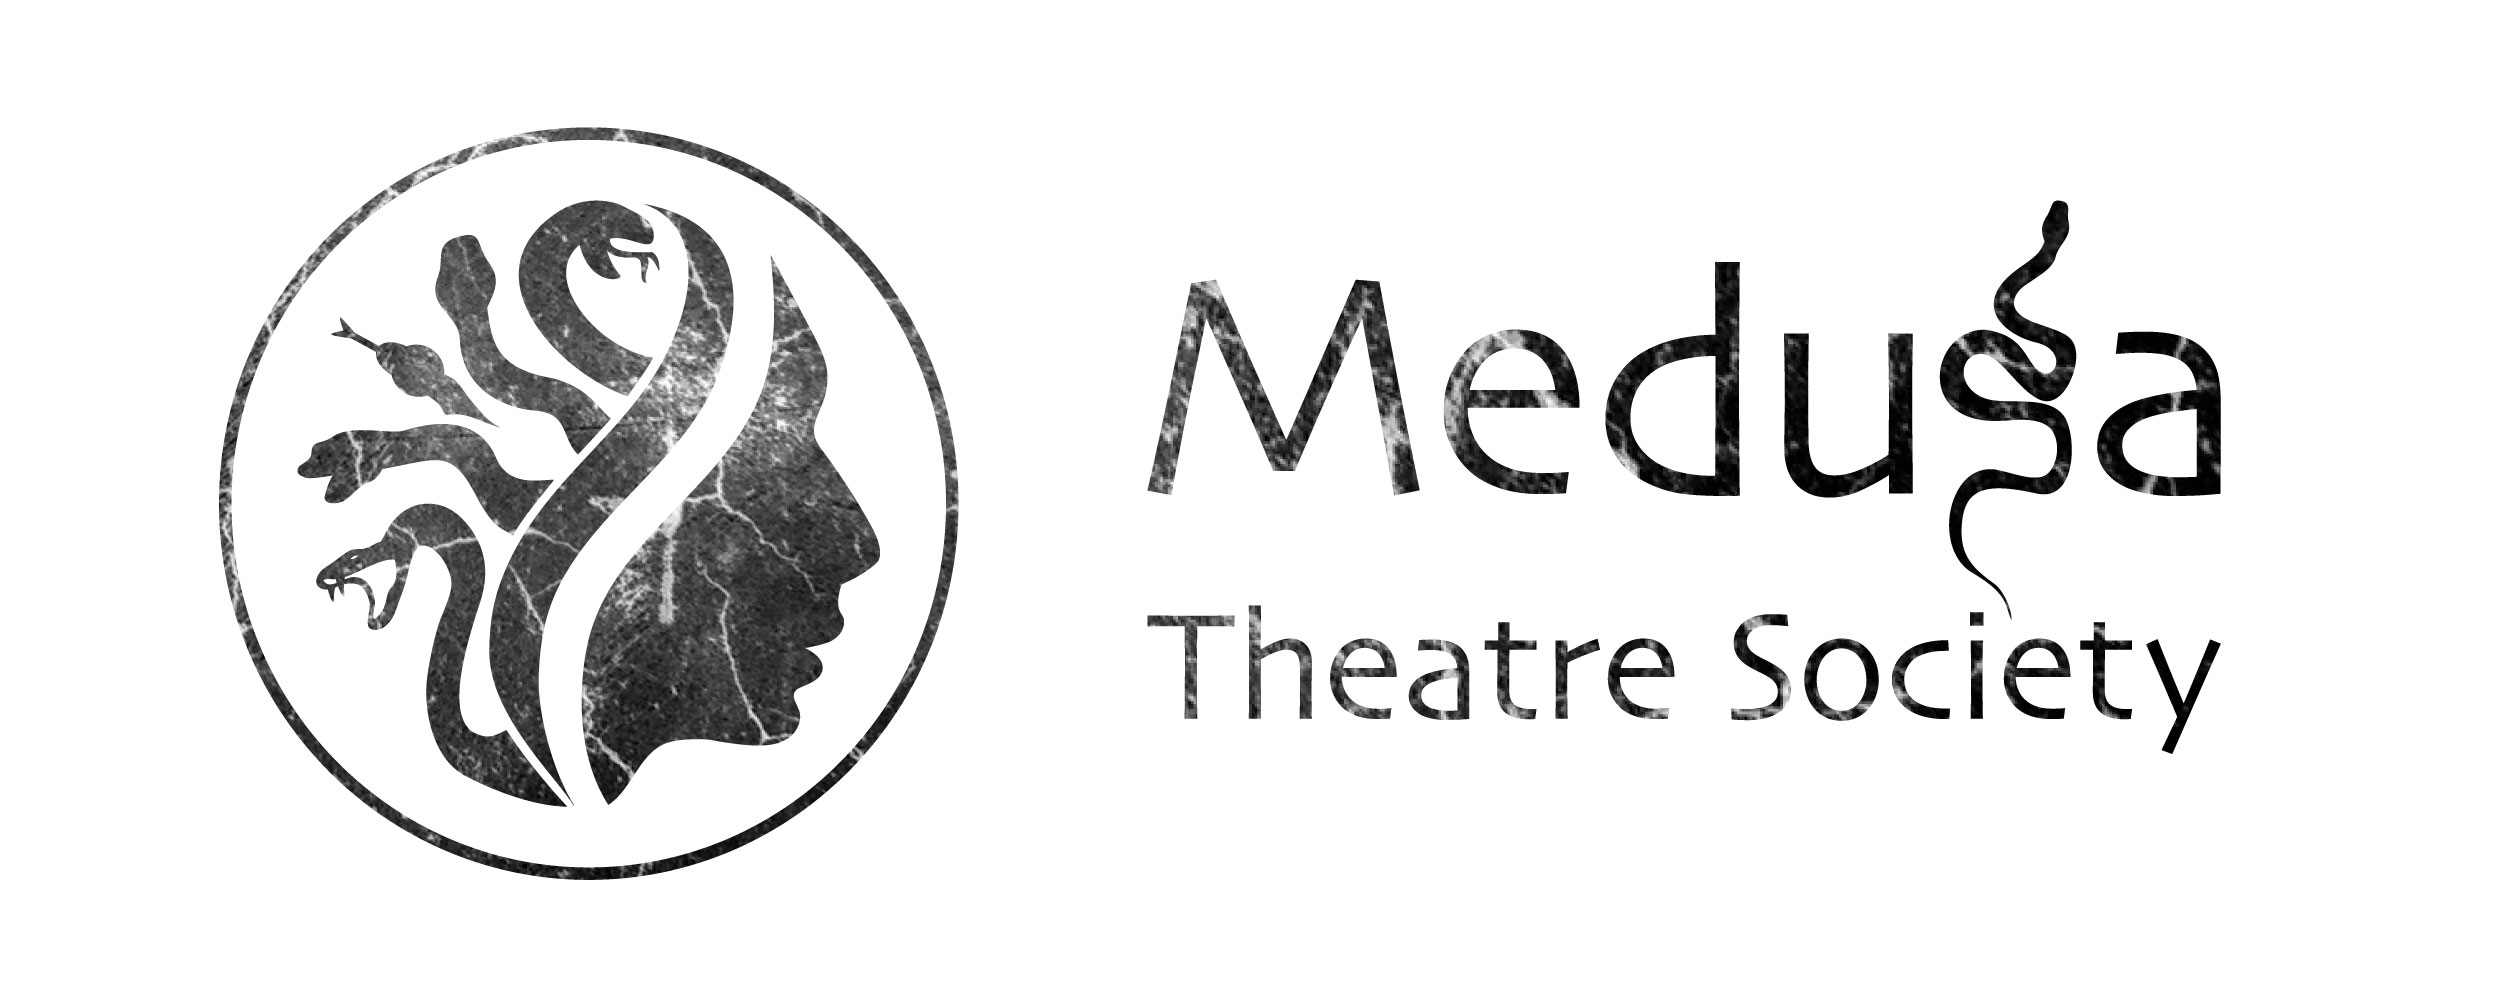 Medusa Theatre Society logo in marble text, the S is a snake, and medusa's head in profile is to the left